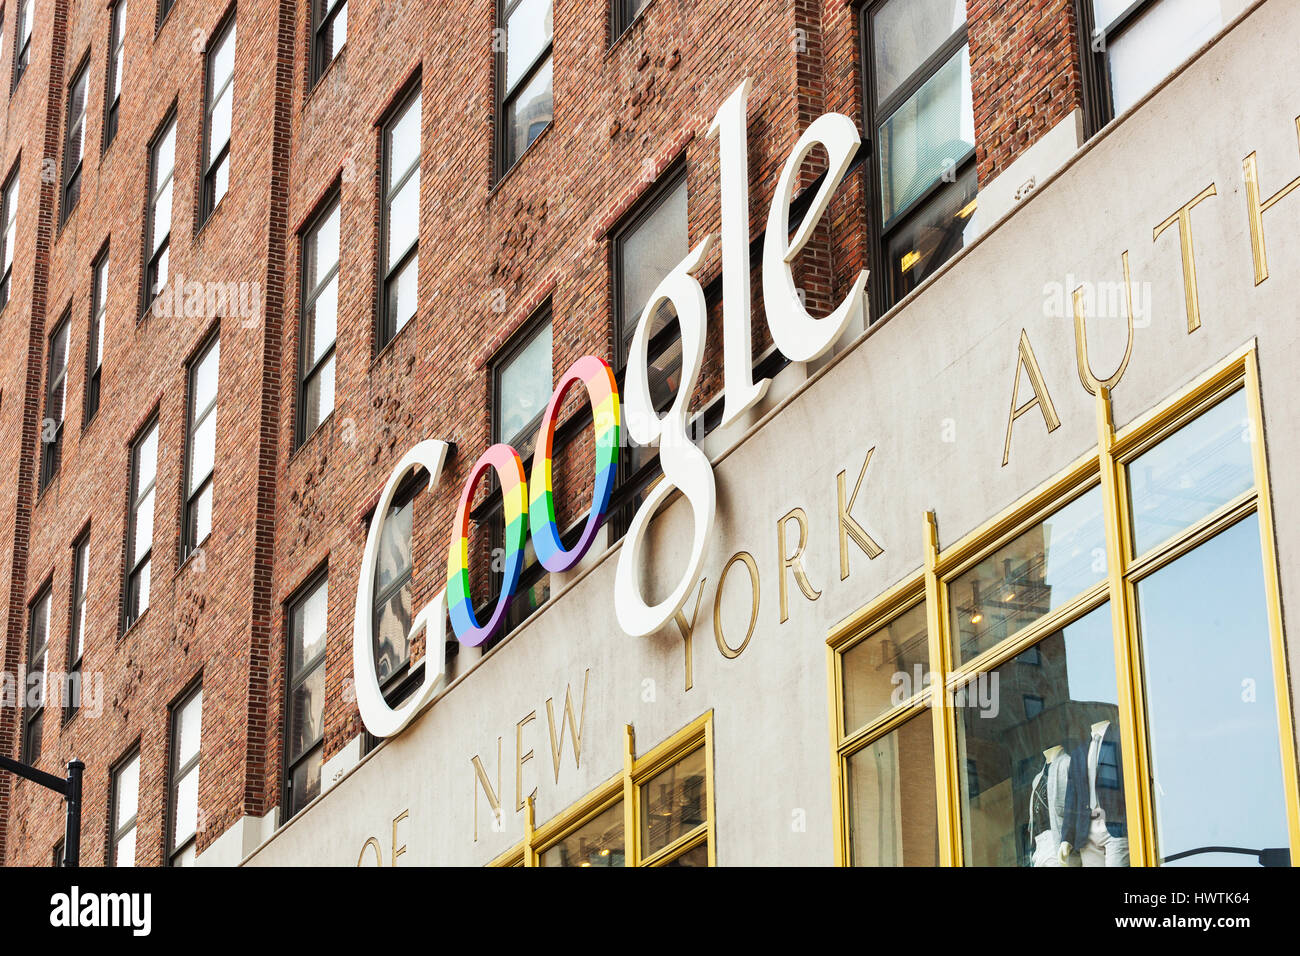 New York City, Usa - July 11, 2015: Exterior view of a Google headquarters building. Google is a multinational corporation specializing in Internet-re Stock Photo